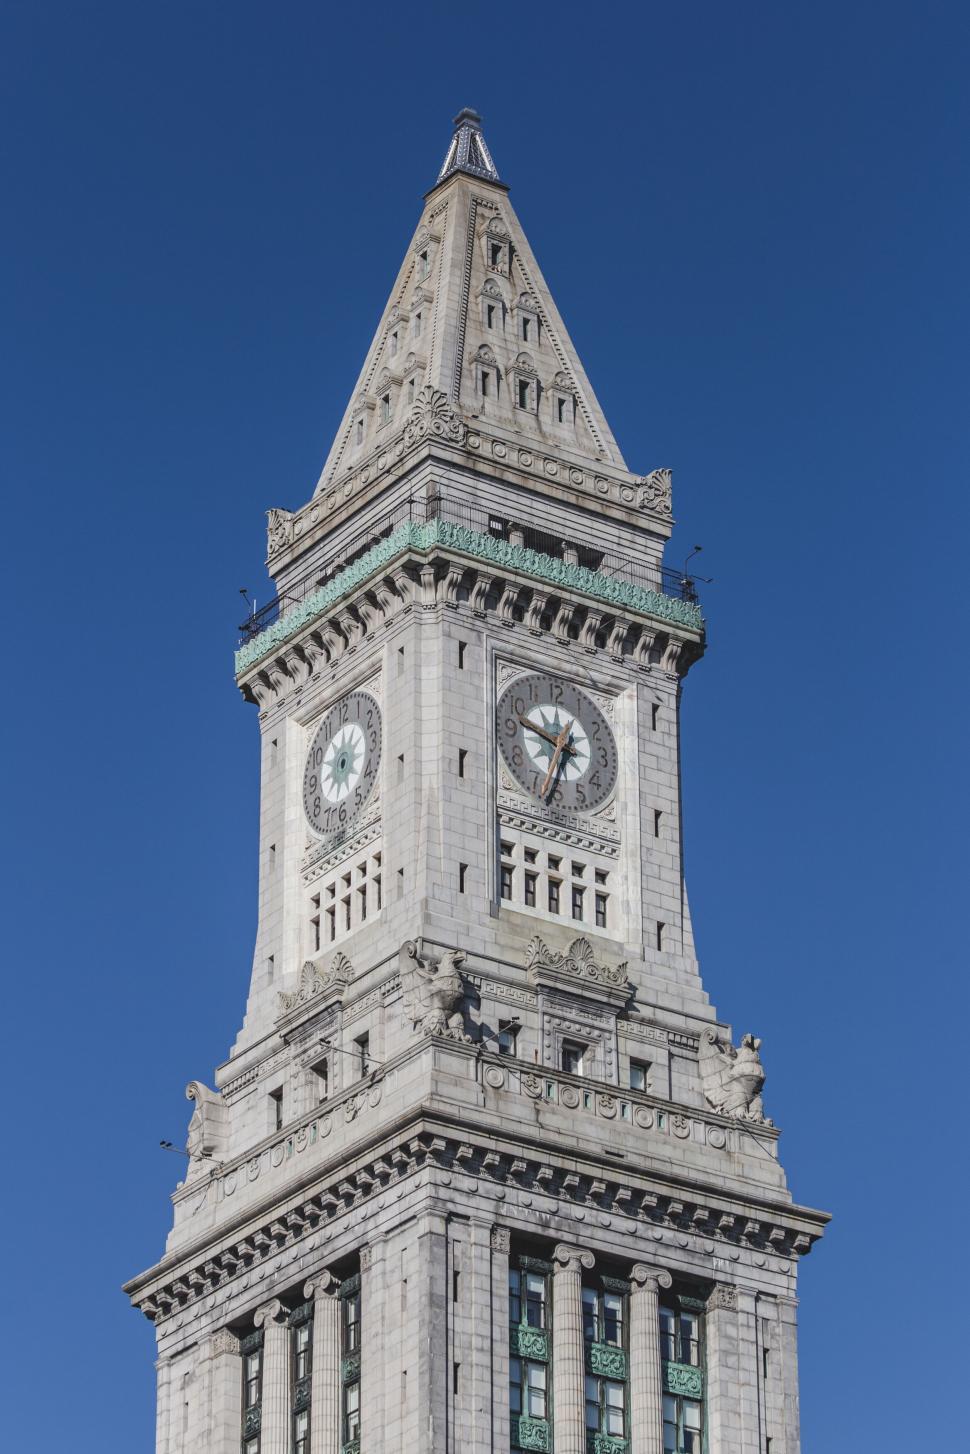 Free Image of Iconic clock tower against blue sky 